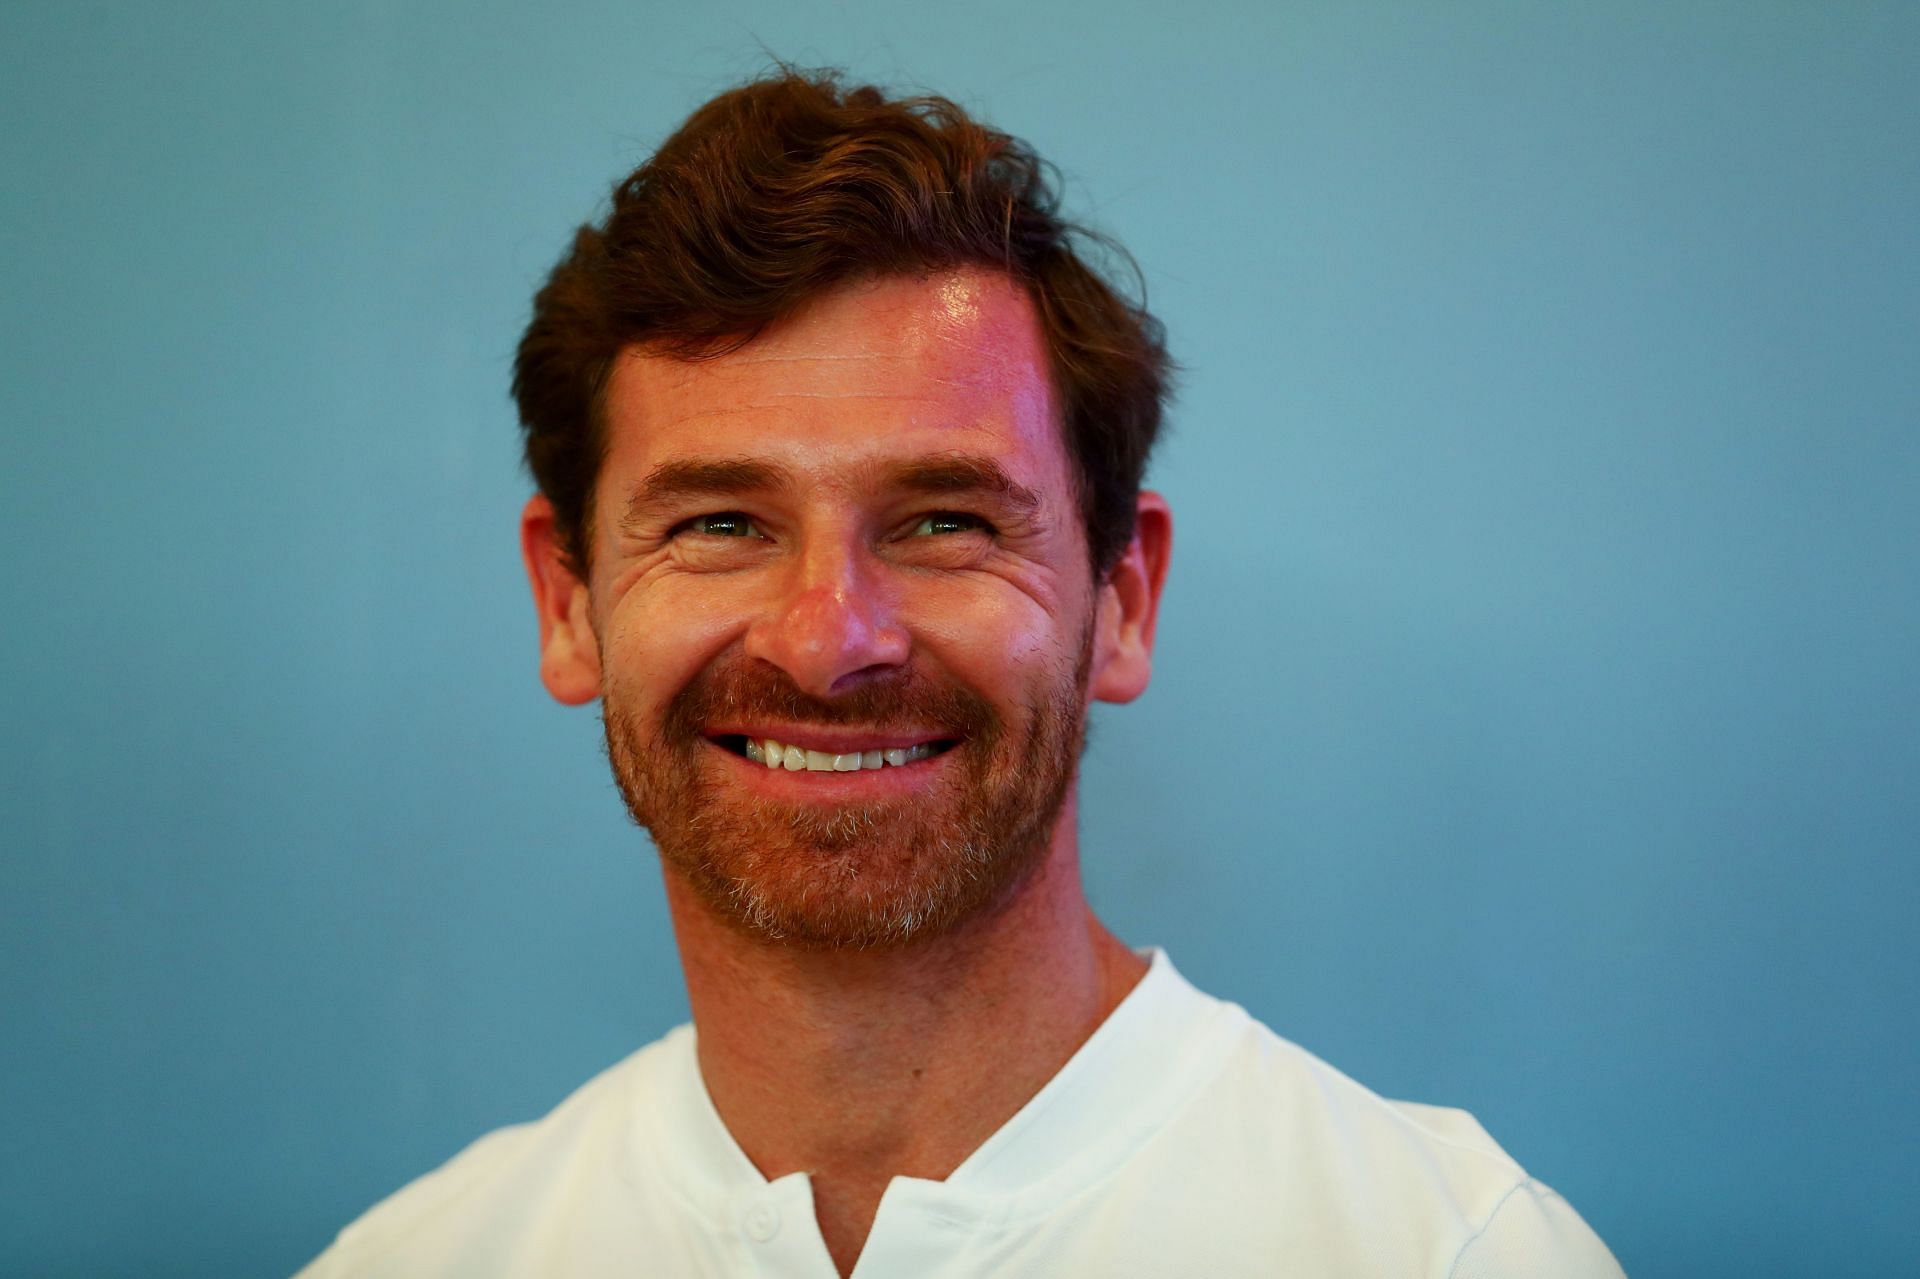 Andre Villas-Boas was close to taking charge at the Parc des Princes in 2013.